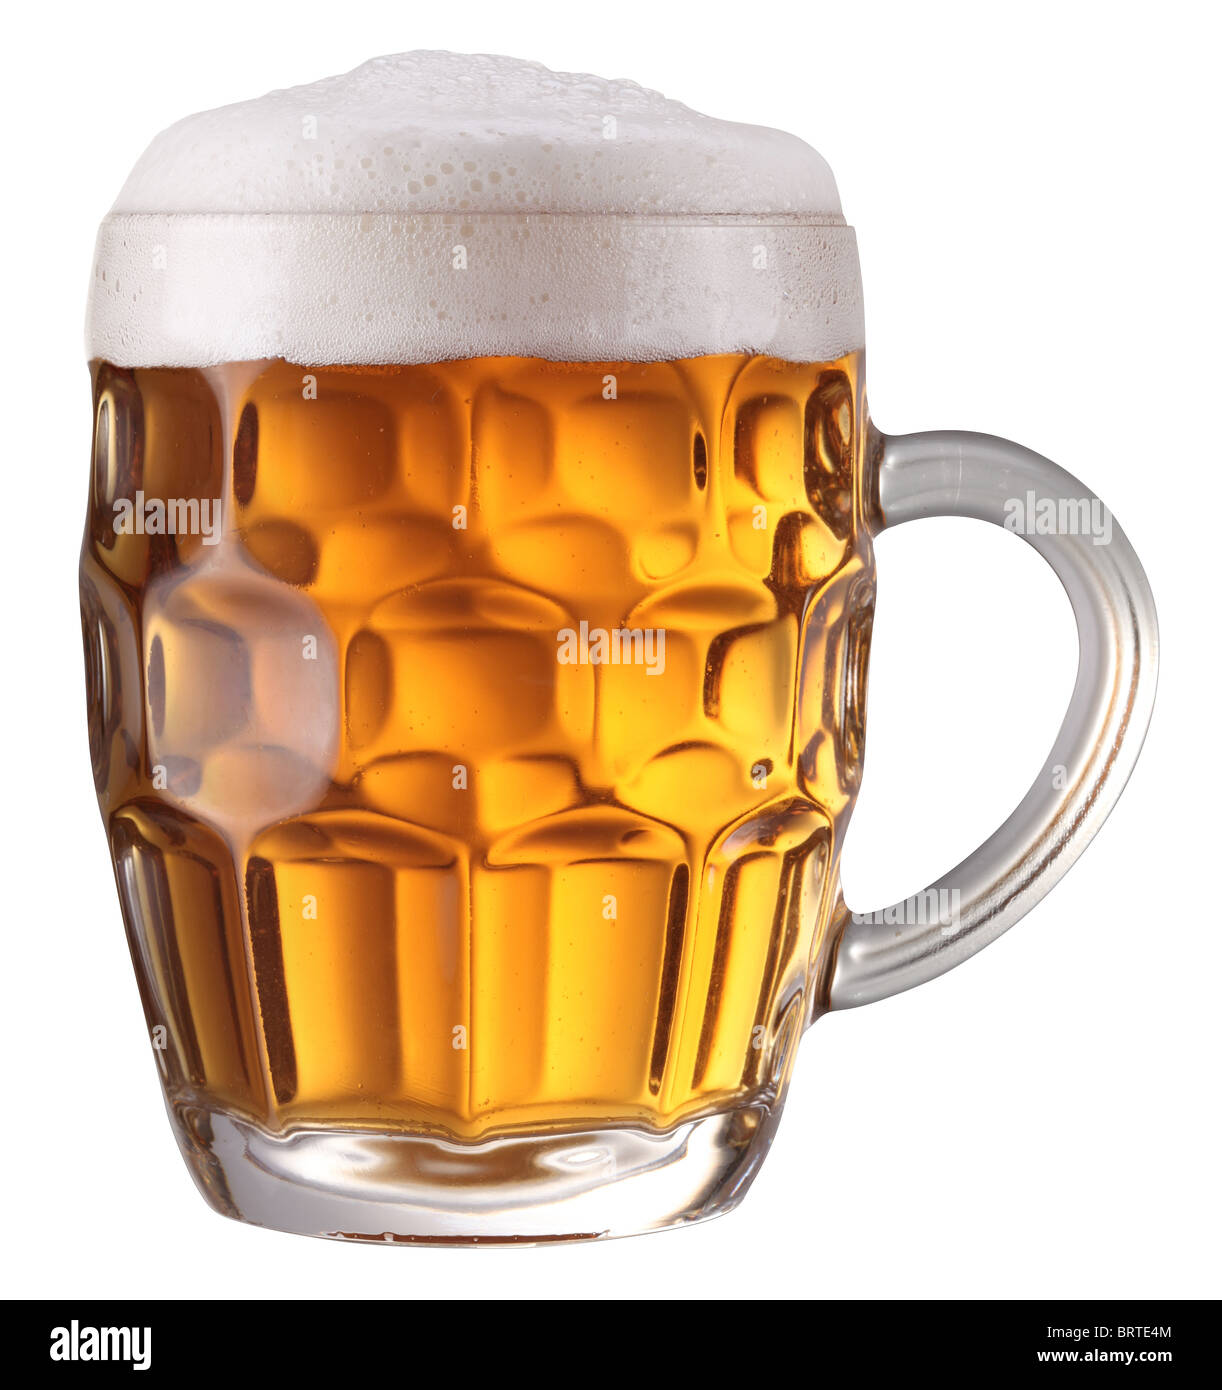 Mug full of fresh beer isolated on a white background. File contains a path to cut. Stock Photo